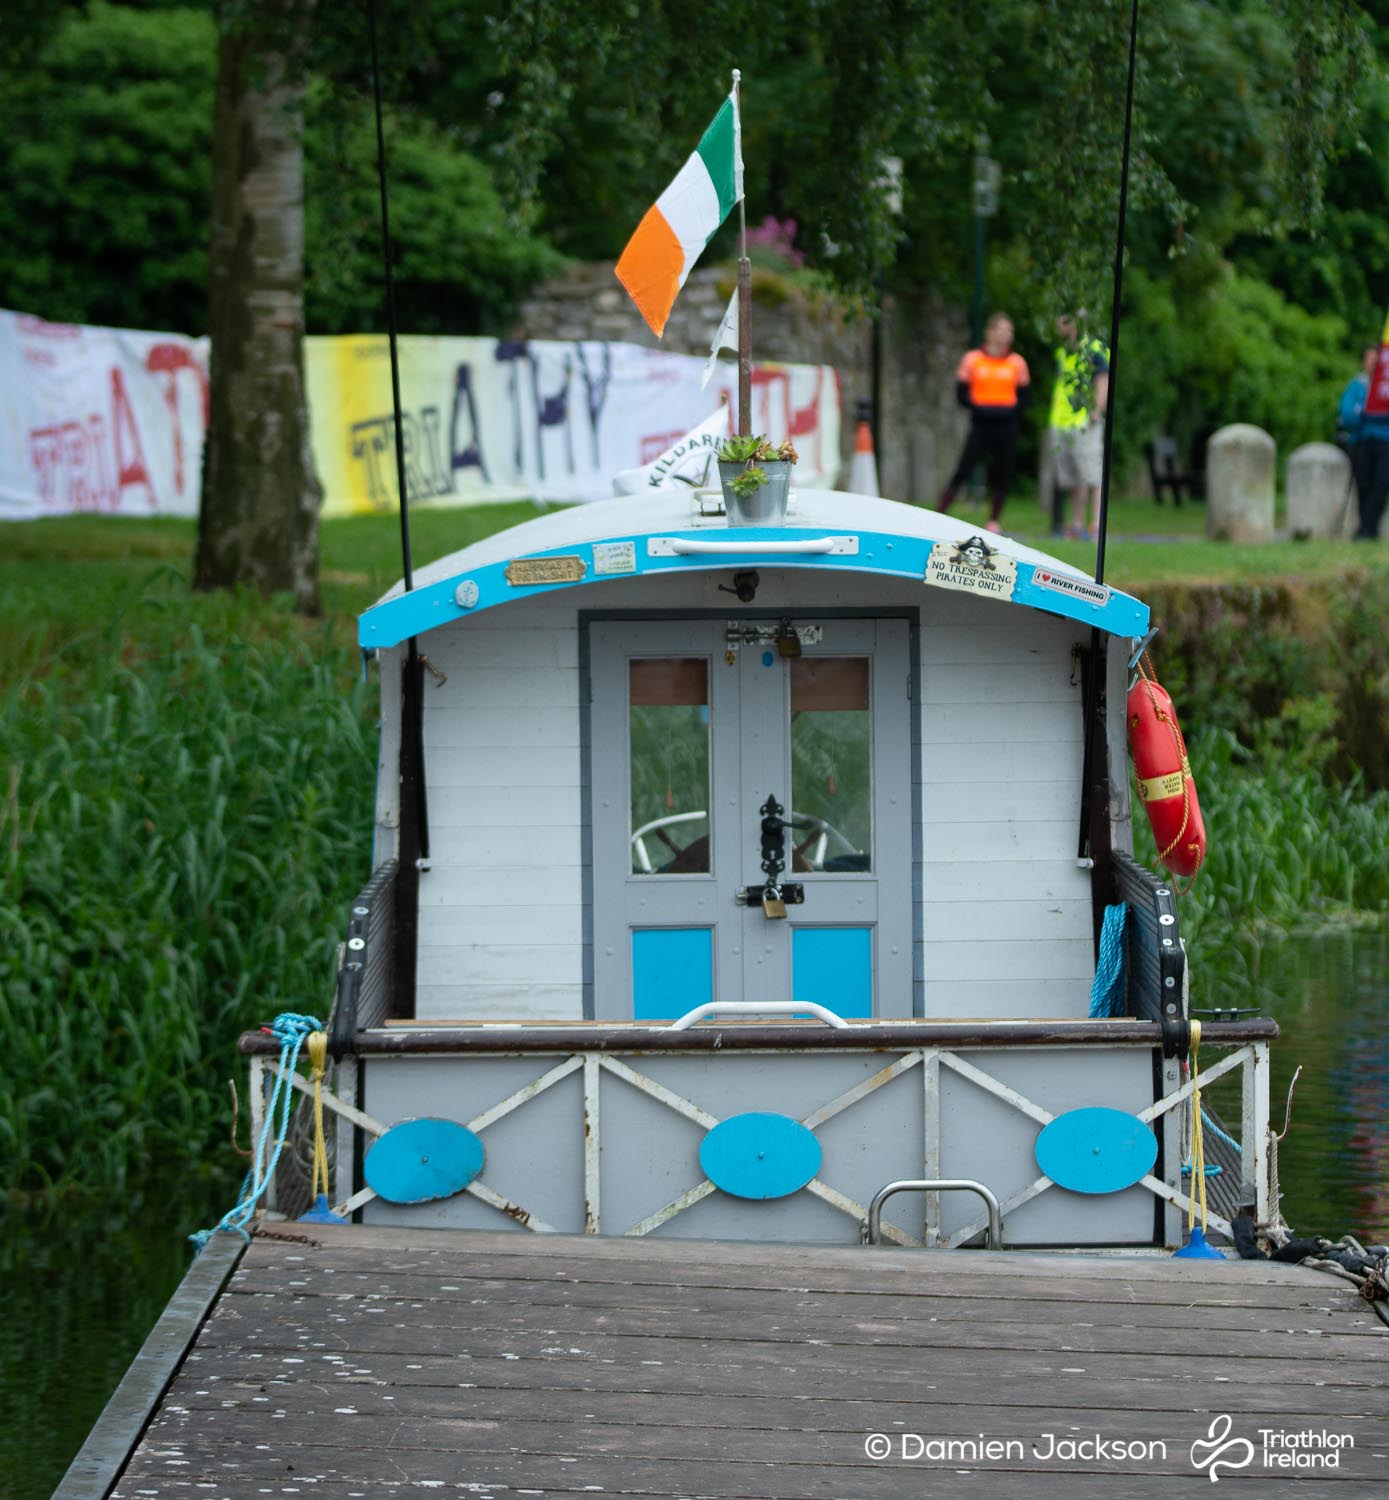 Athy_2018 (16 of 526) - TriAthy - XII Edition - 2nd June 2018